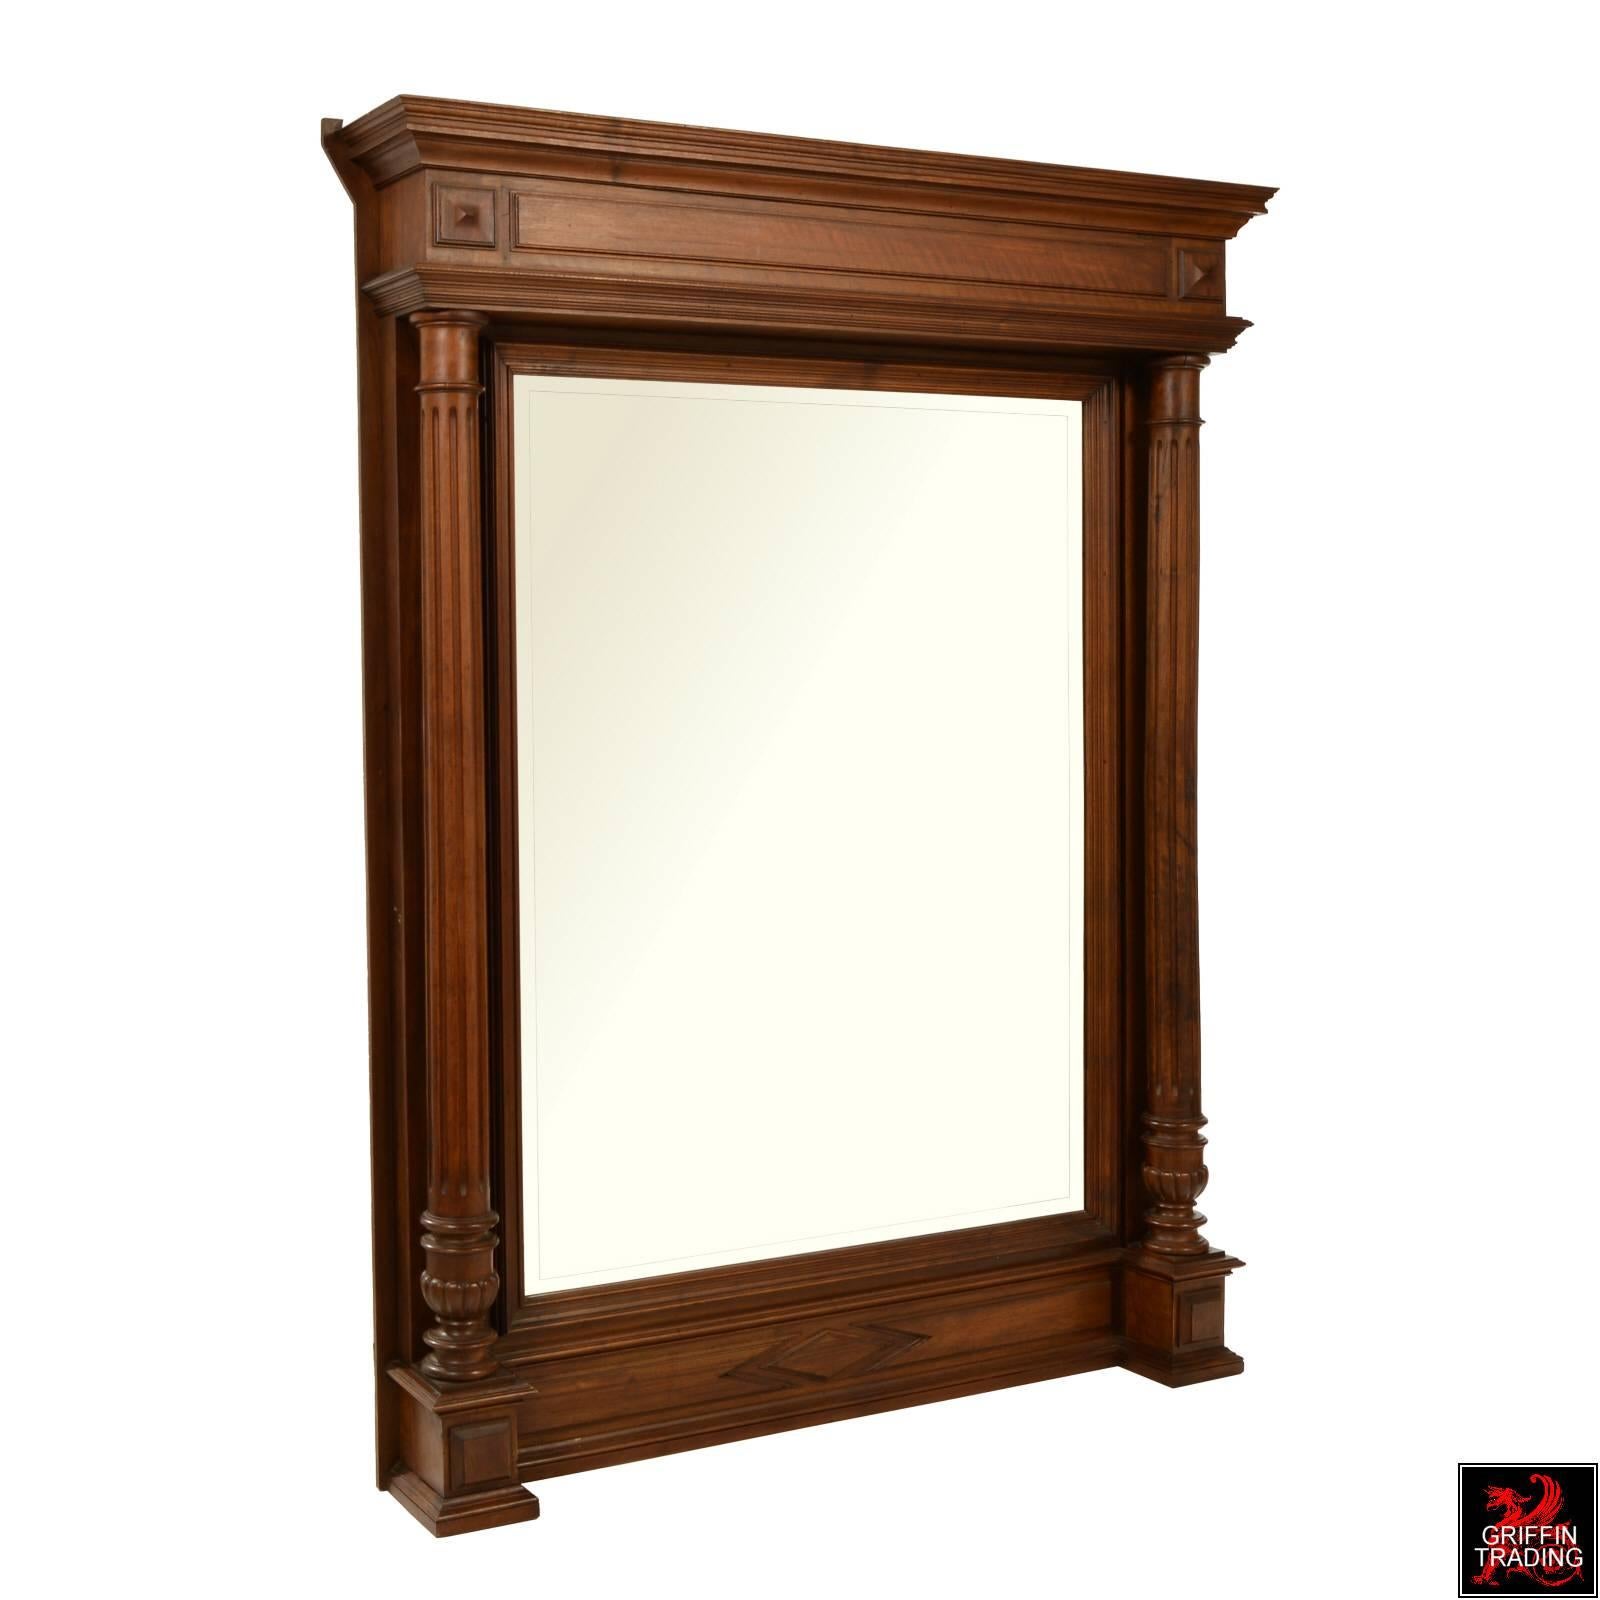 Hand-Carved 19th Century French Bevelled Wall or Overmantel Mirror with Walnut Frame For Sale